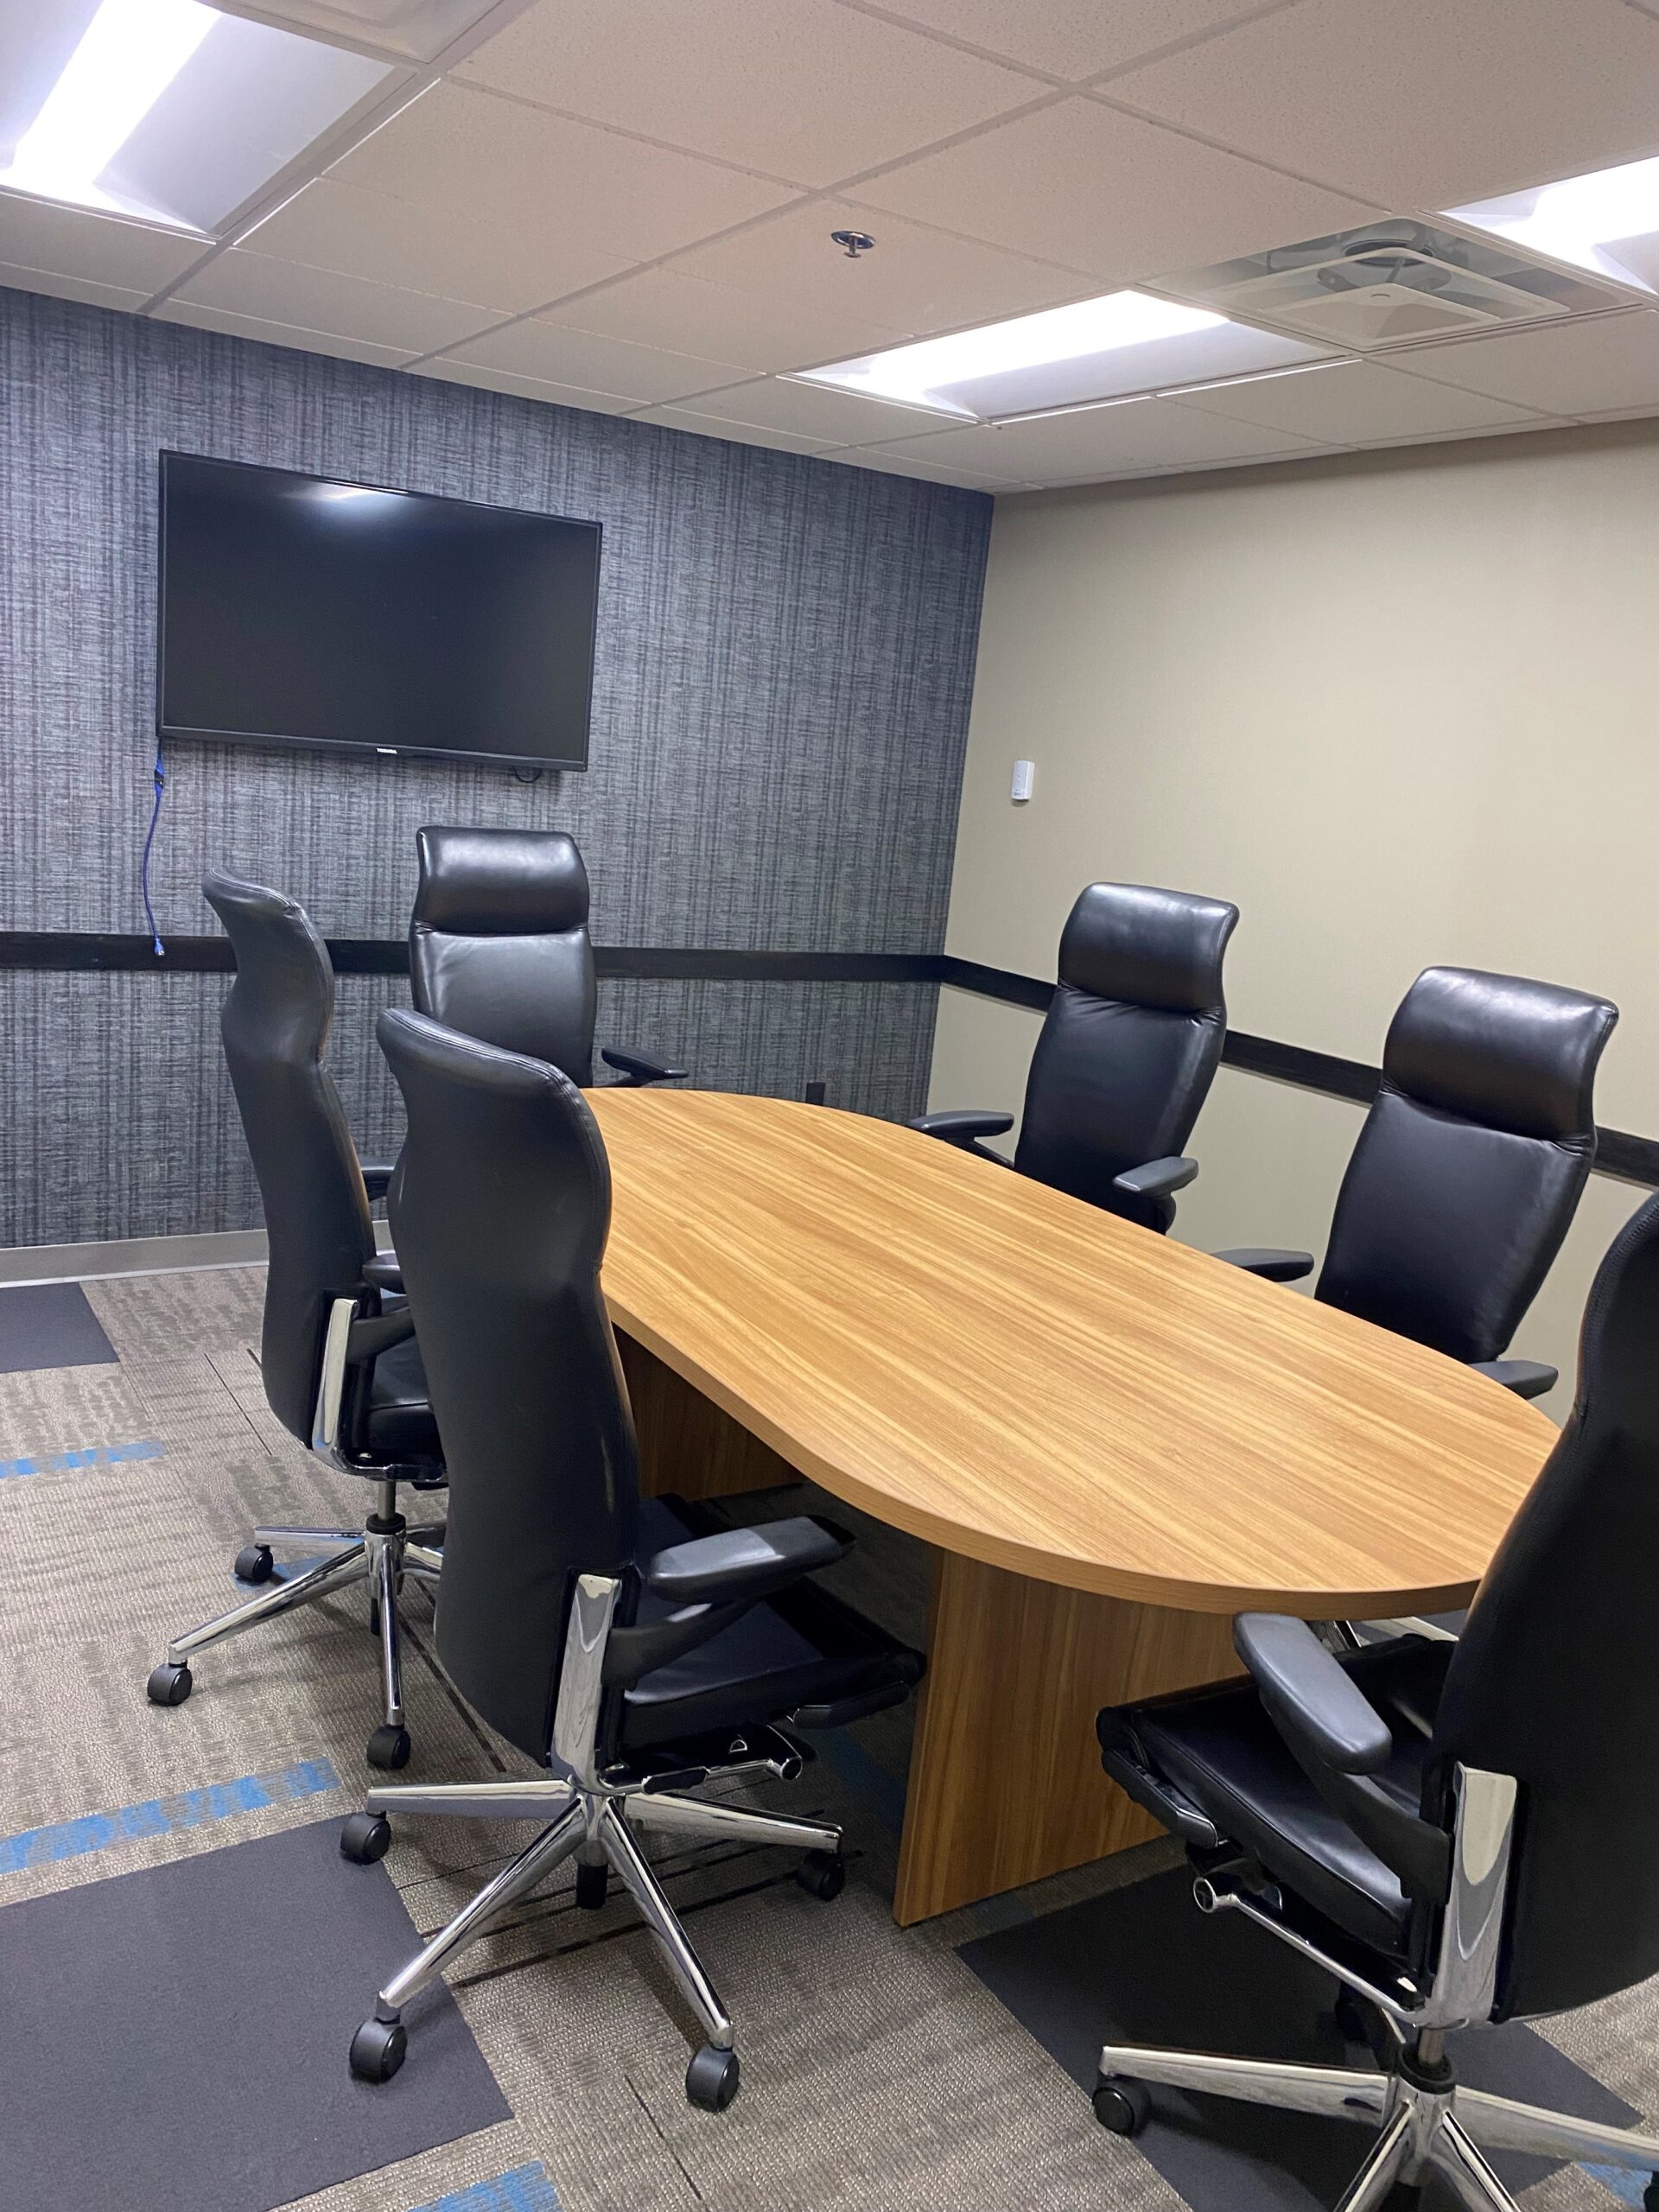 Meeting Rooms and Conference Rooms Rental in New Jersey